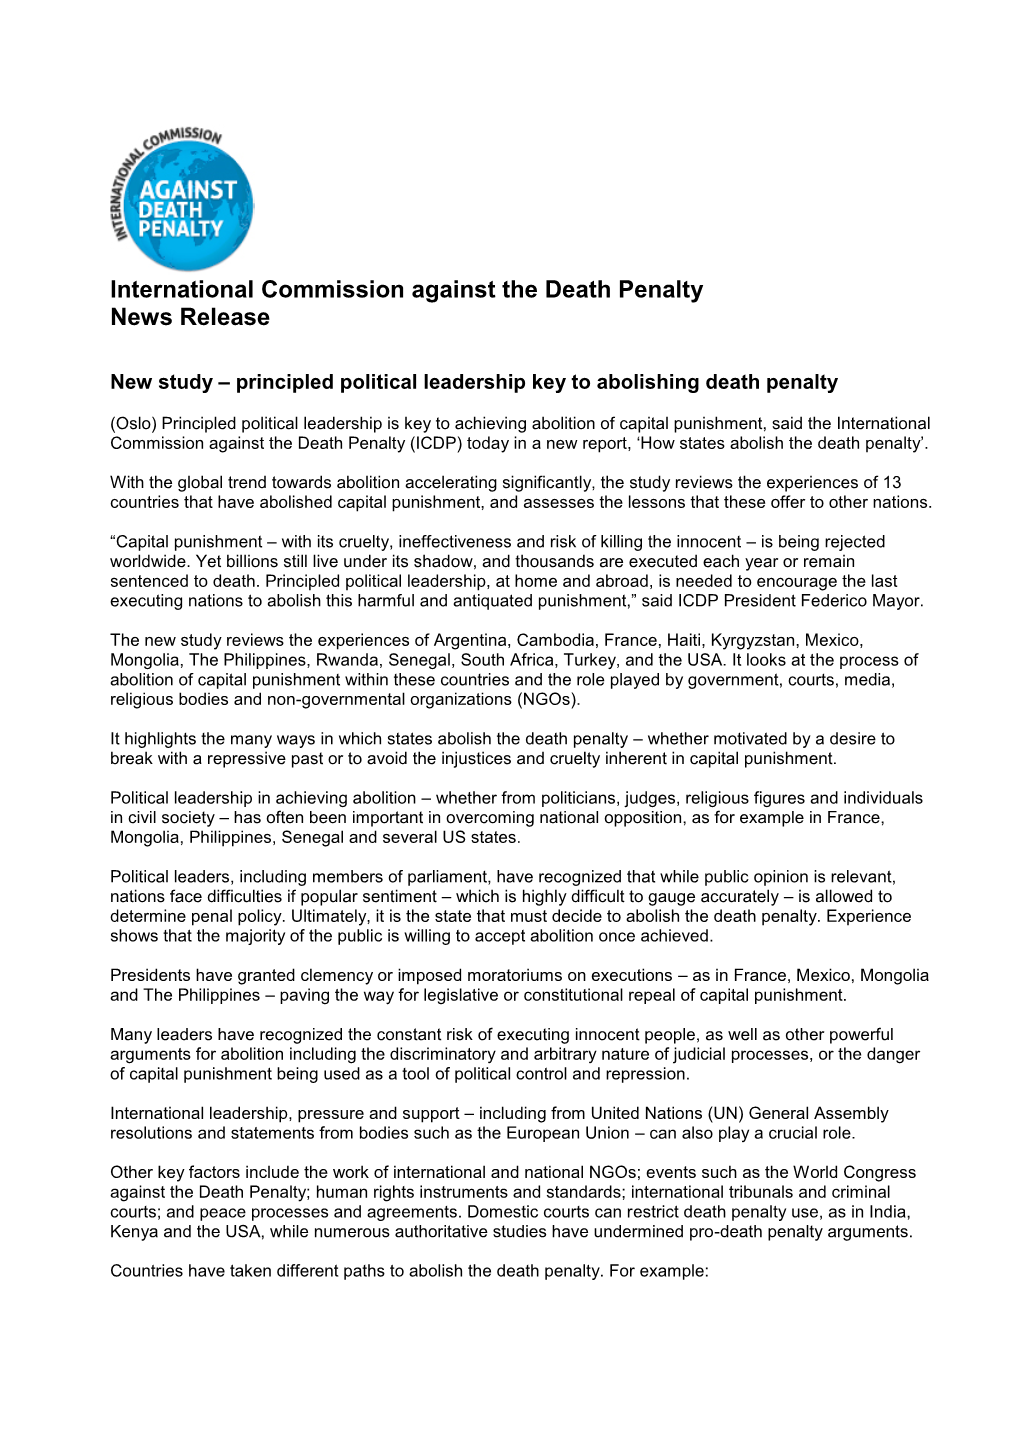 International Commission Against the Death Penalty News Release